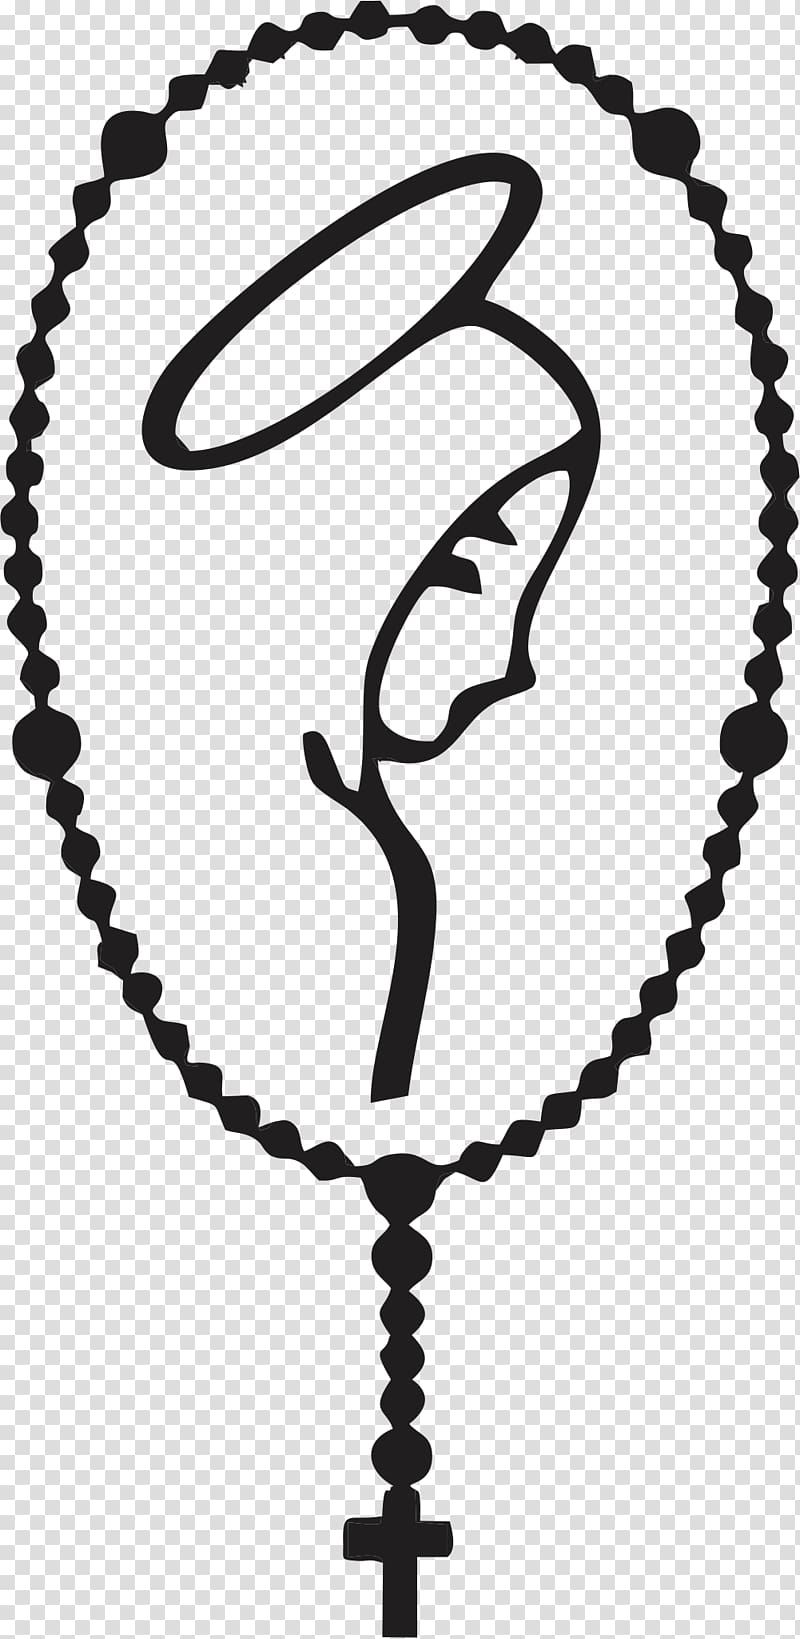 Our Lady Mediatrix of All Graces Virgin and Child with a Rosary, maria transparent background PNG clipart